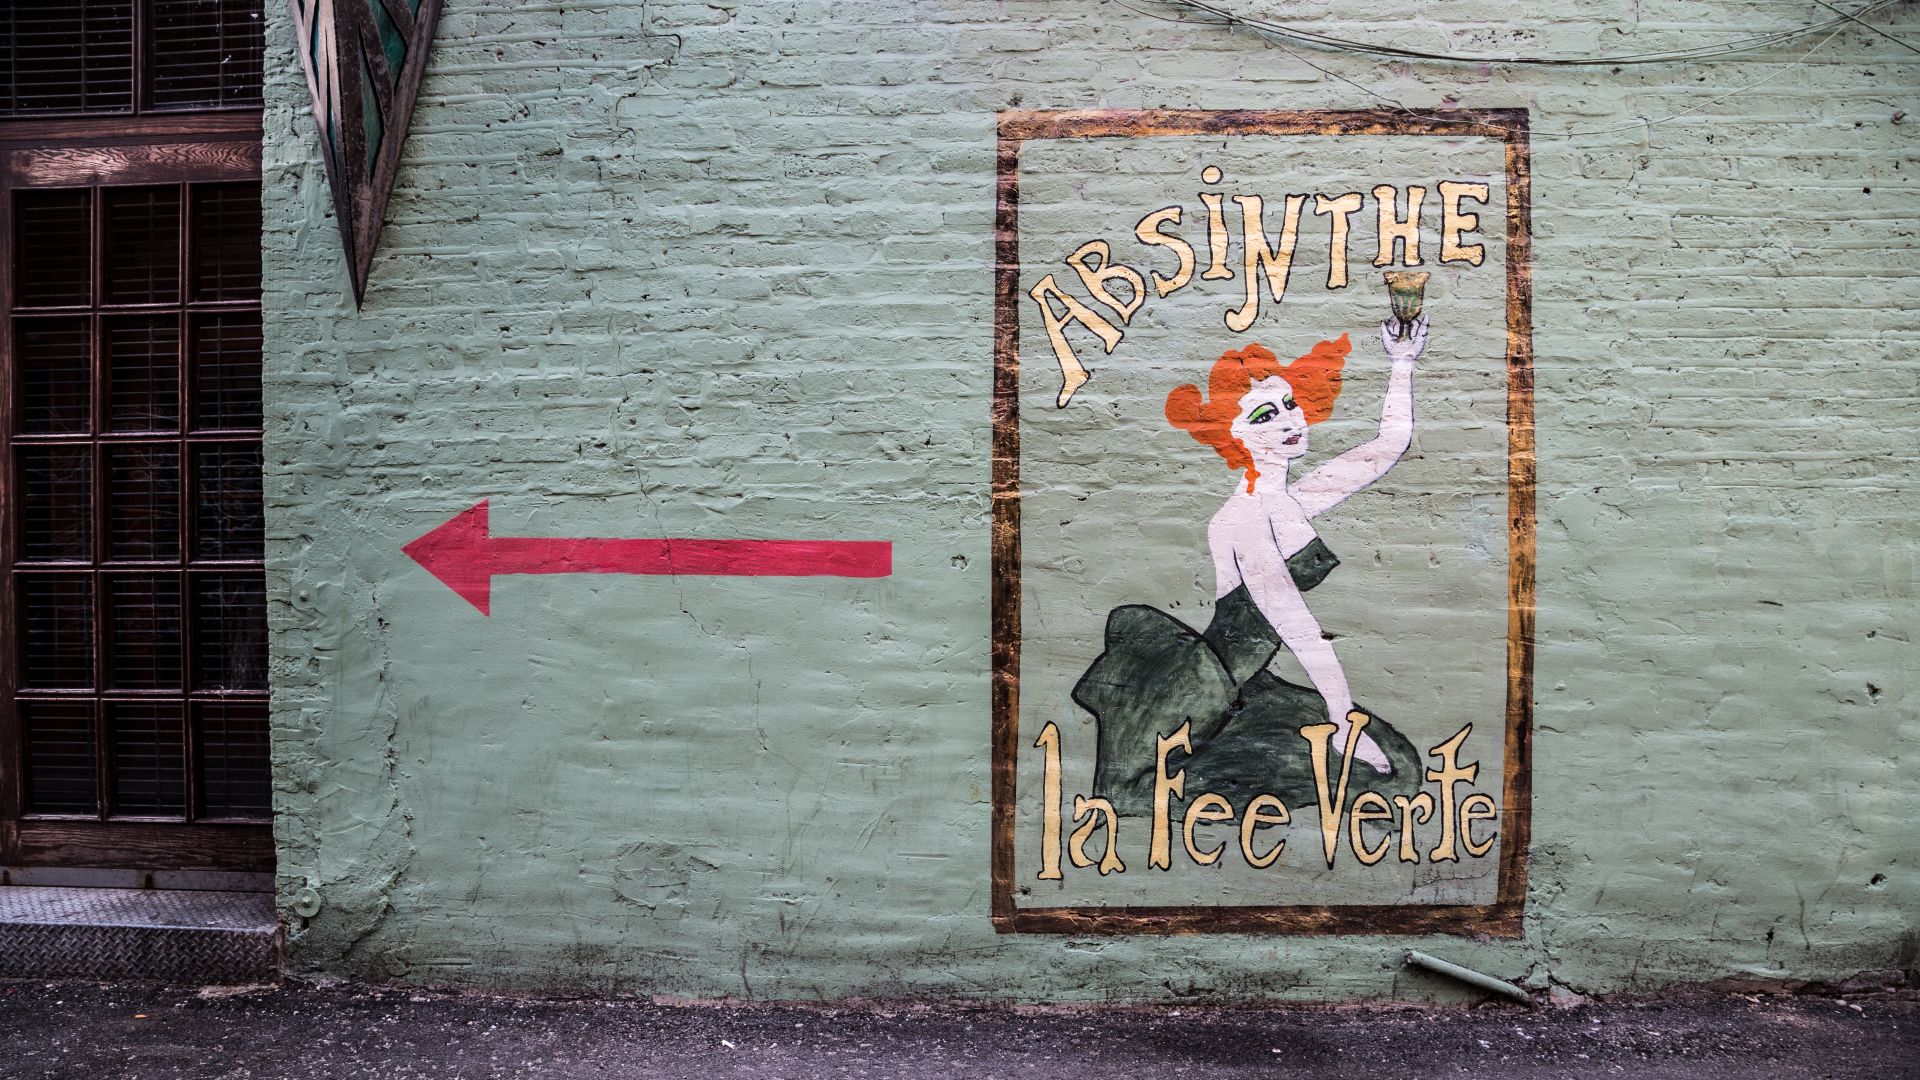 Absinthe mural on a grey wall, large red arrow pointing left